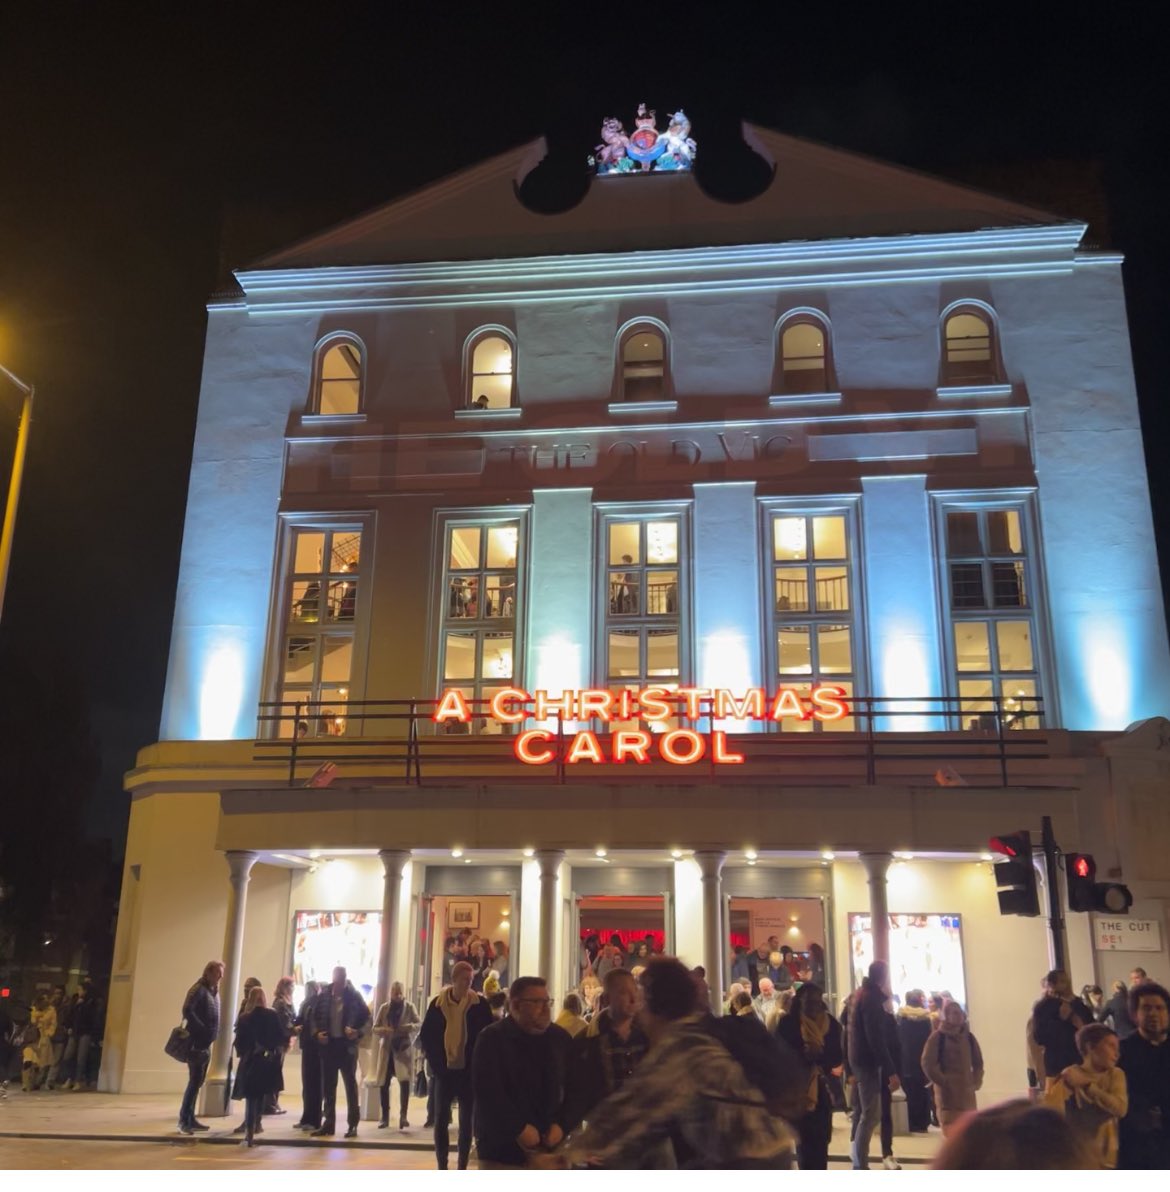 @oldvictheatre Last week I saw the great play “A Christmas Carol” in the beautiful and cozy theater “The Old Vic”. Great creative performances in an imaginative, fairytale setting!! really fantastic!🤩🎭